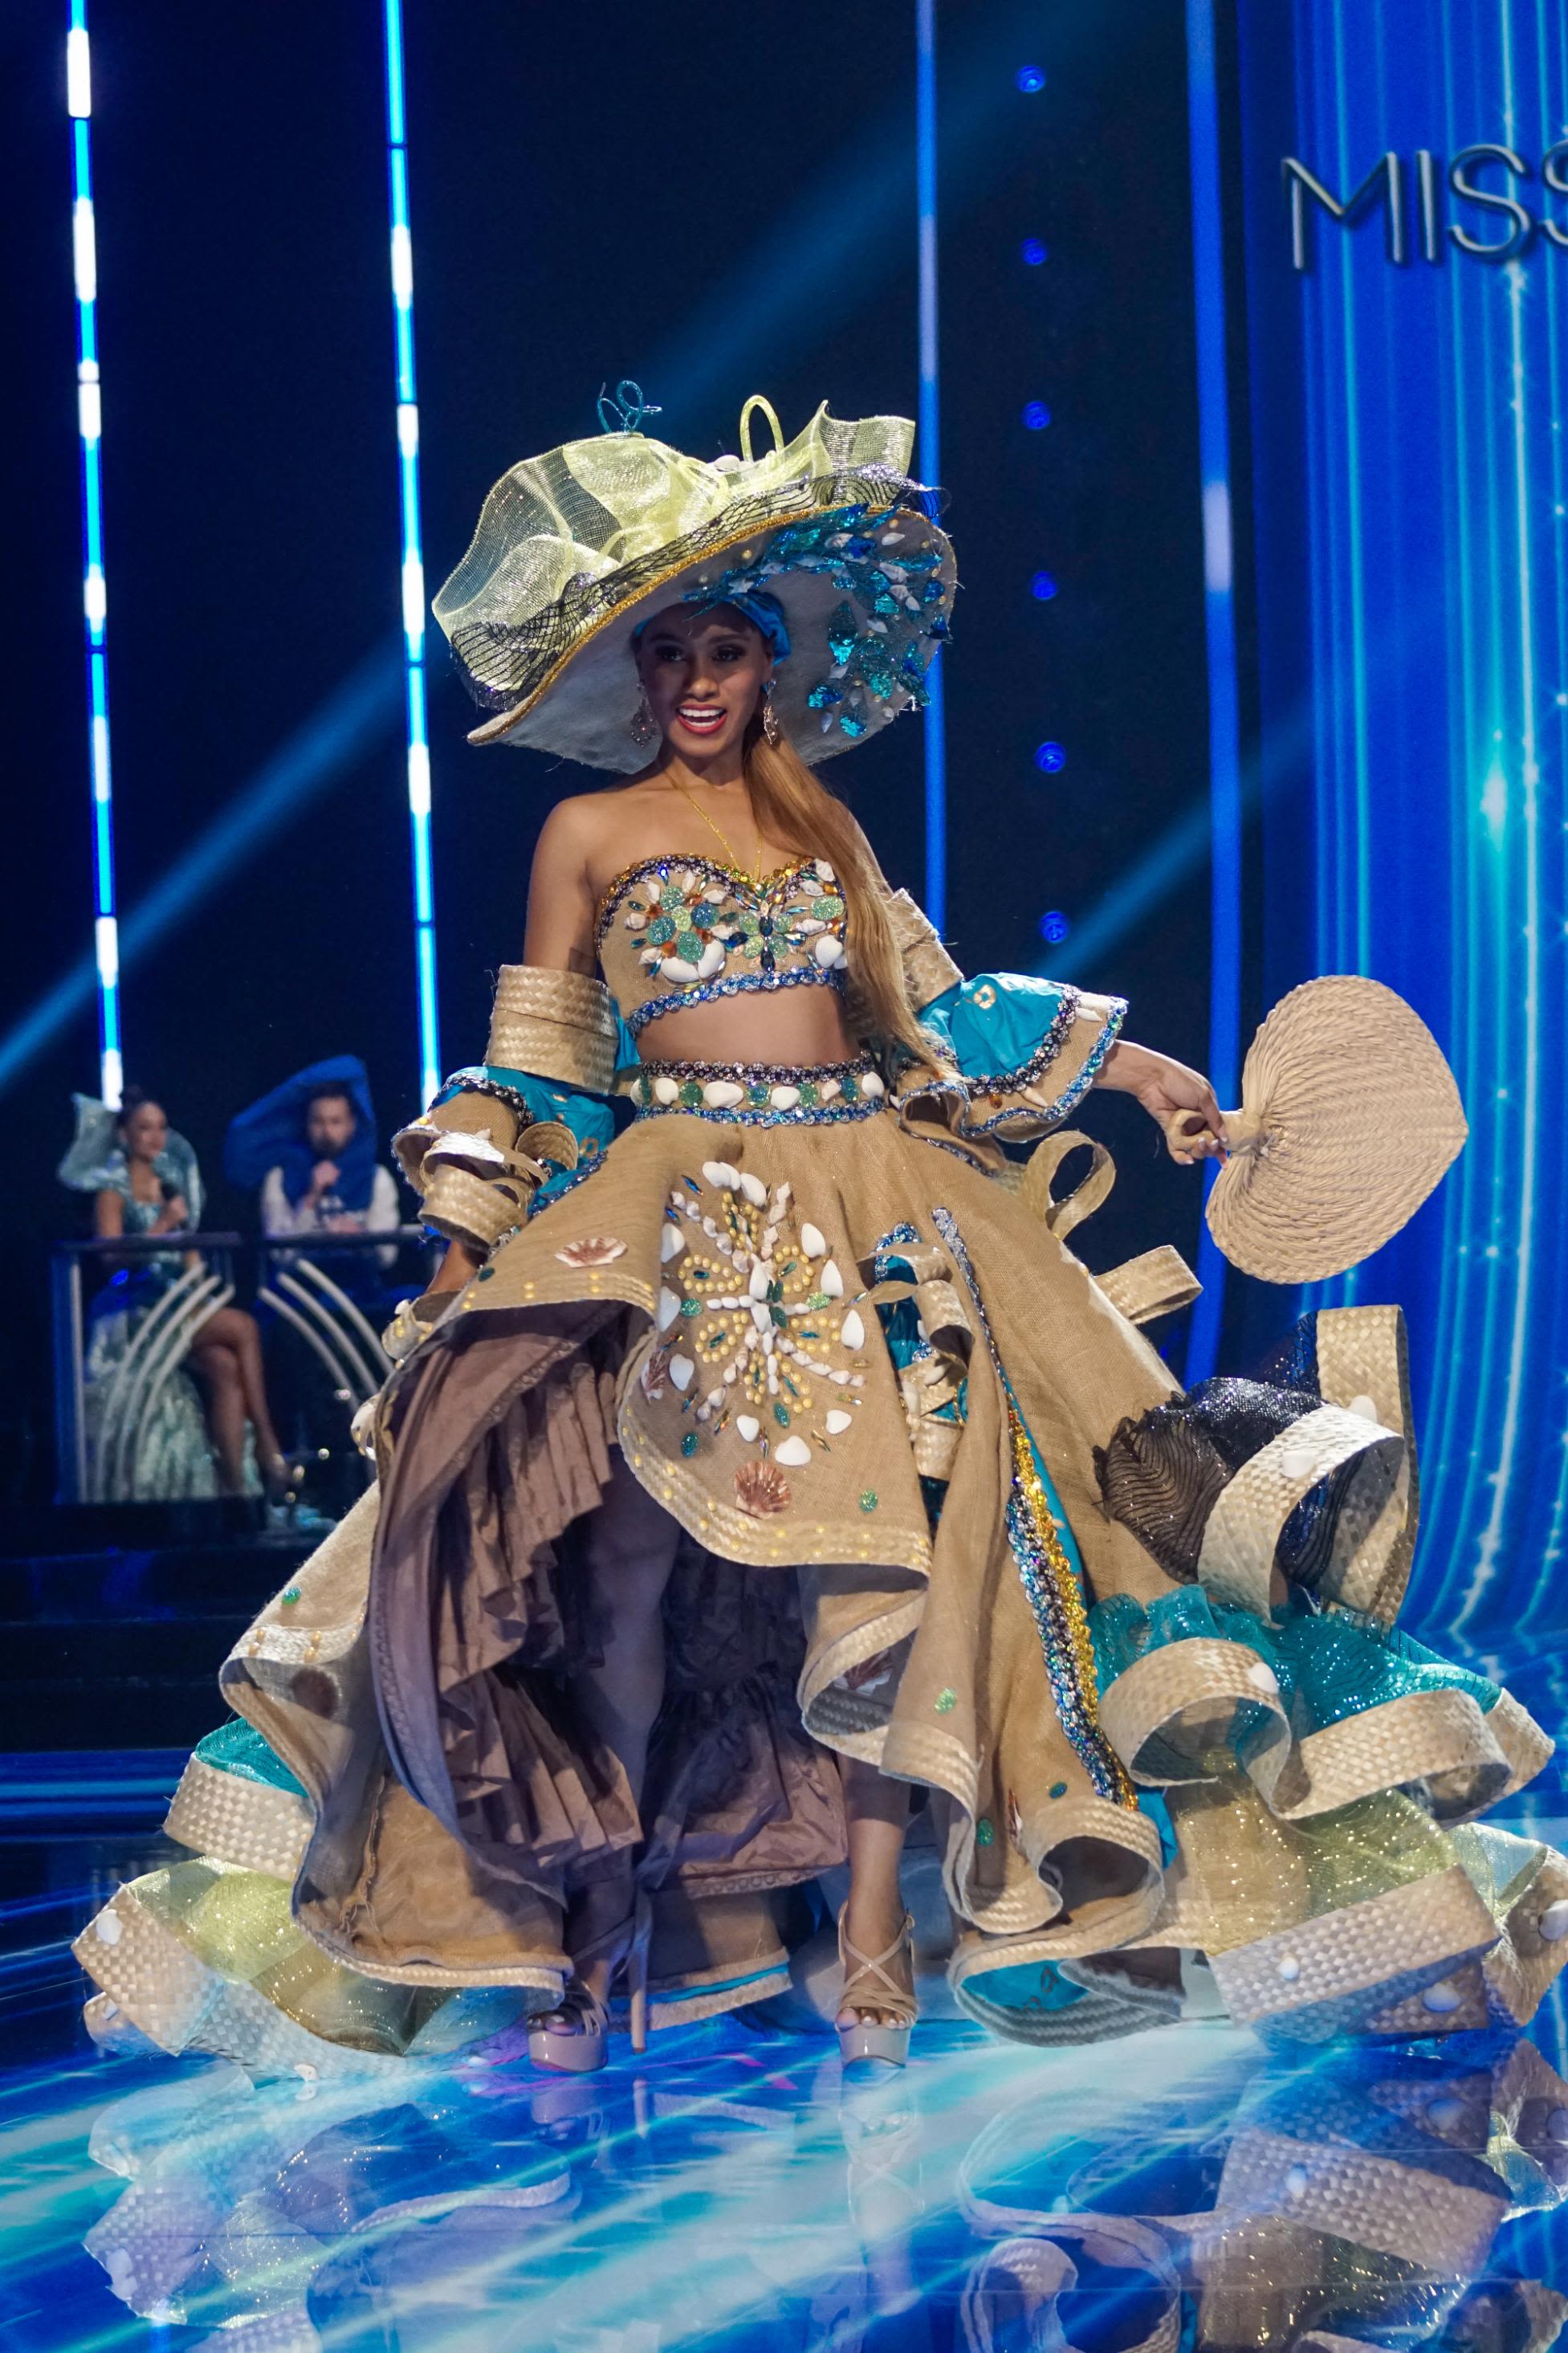 Juxtaposing rustic burlap and straw fabrication and detailing with precious gems, Miss Bahamas' costume paid a homage to popular 19th-century childrens' doll.